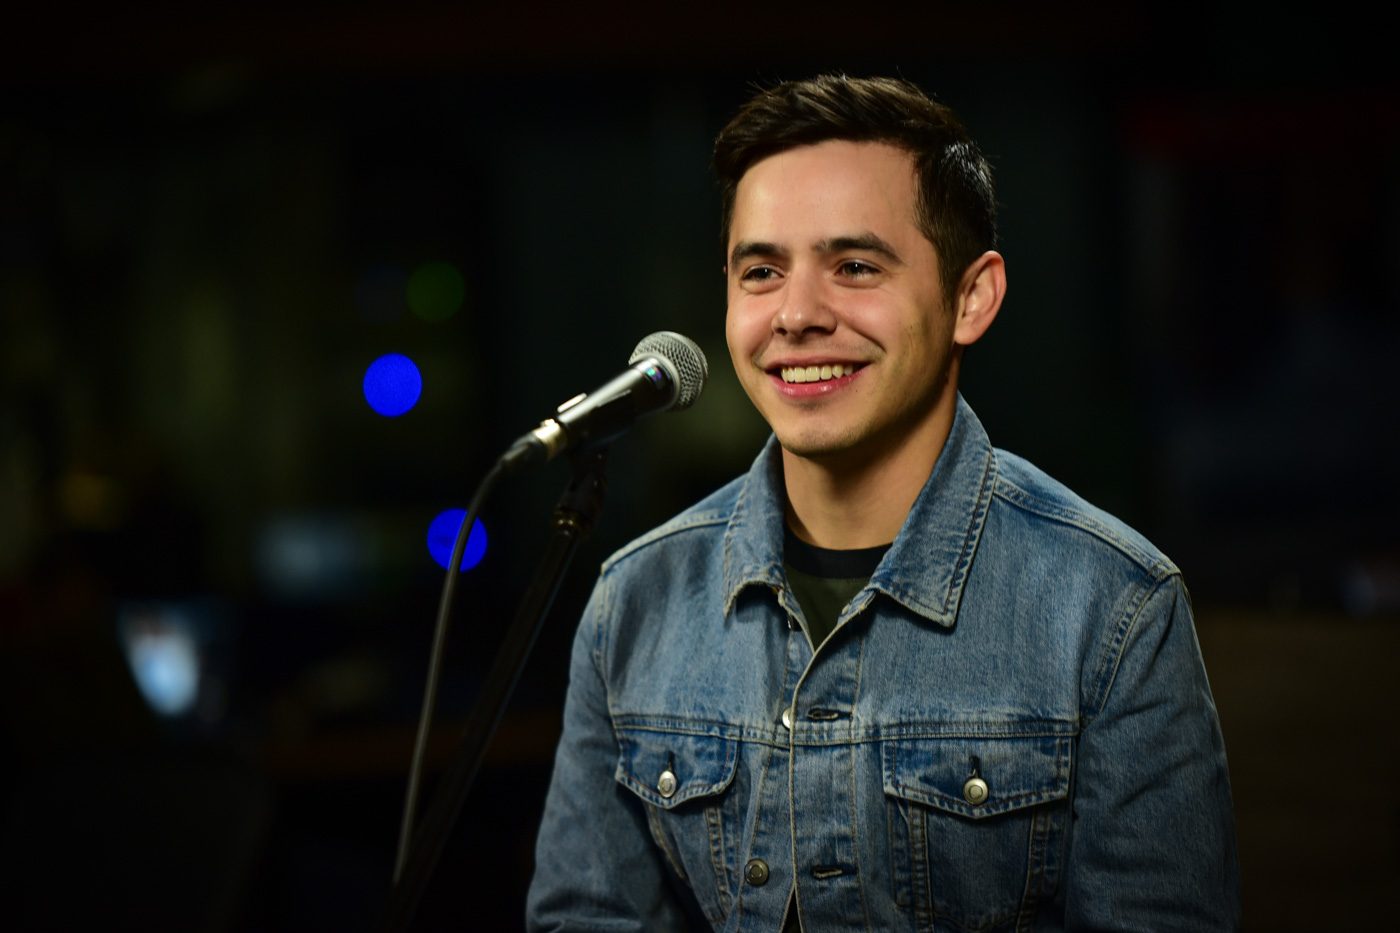 WATCH: David Archuleta celebrates 10 years of ‘Crush’ with stripped-down version